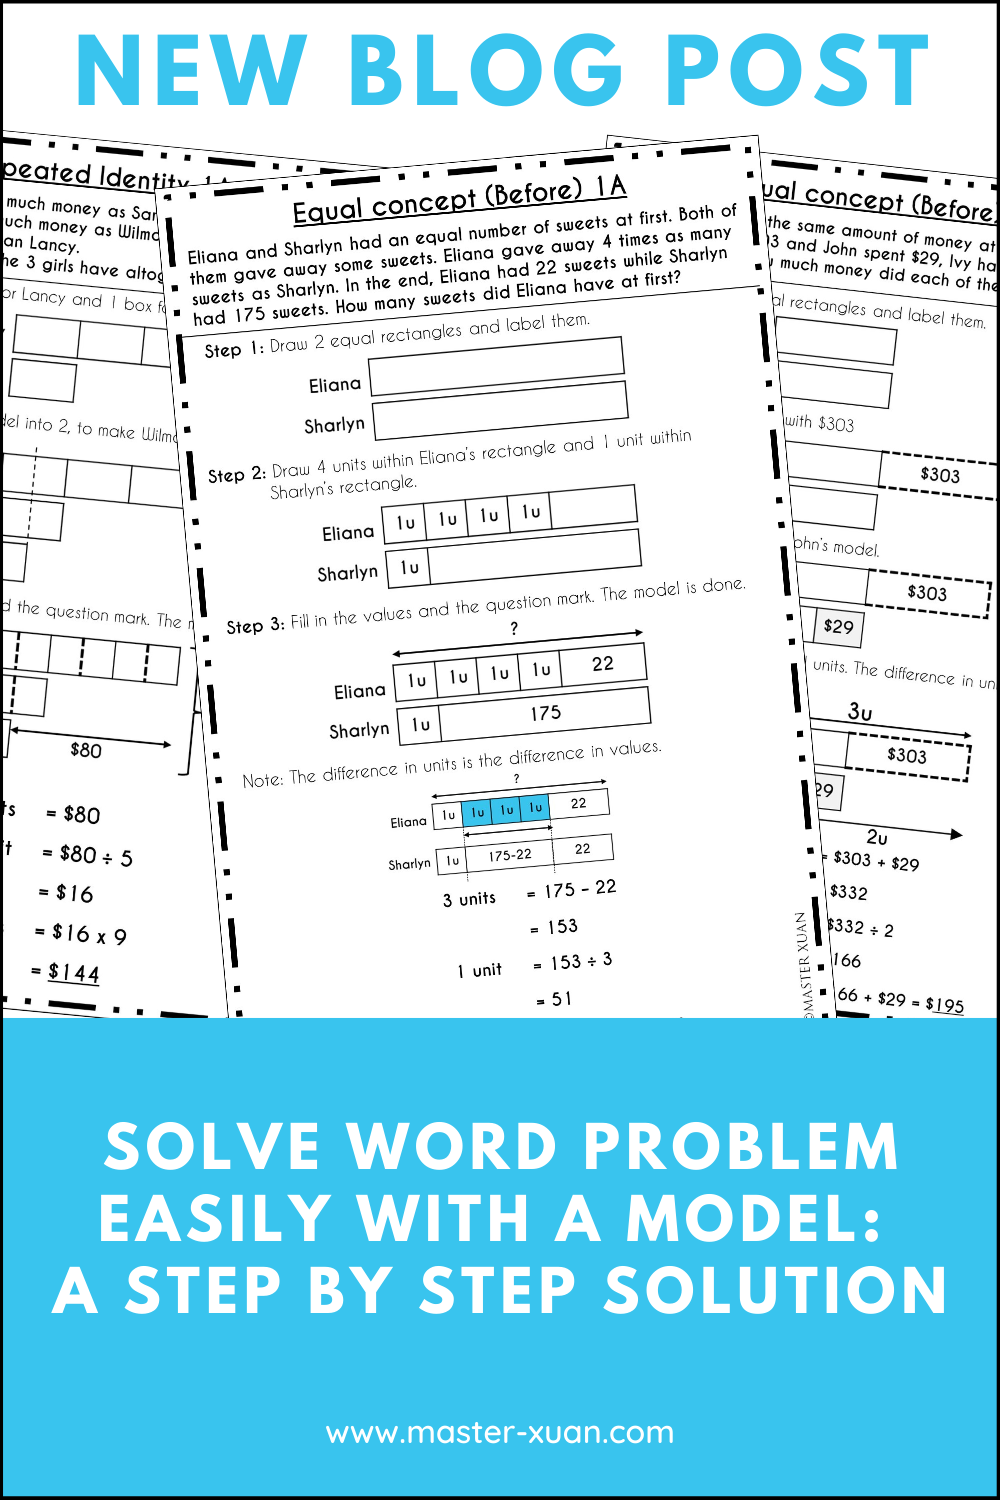 what is the solve word problem